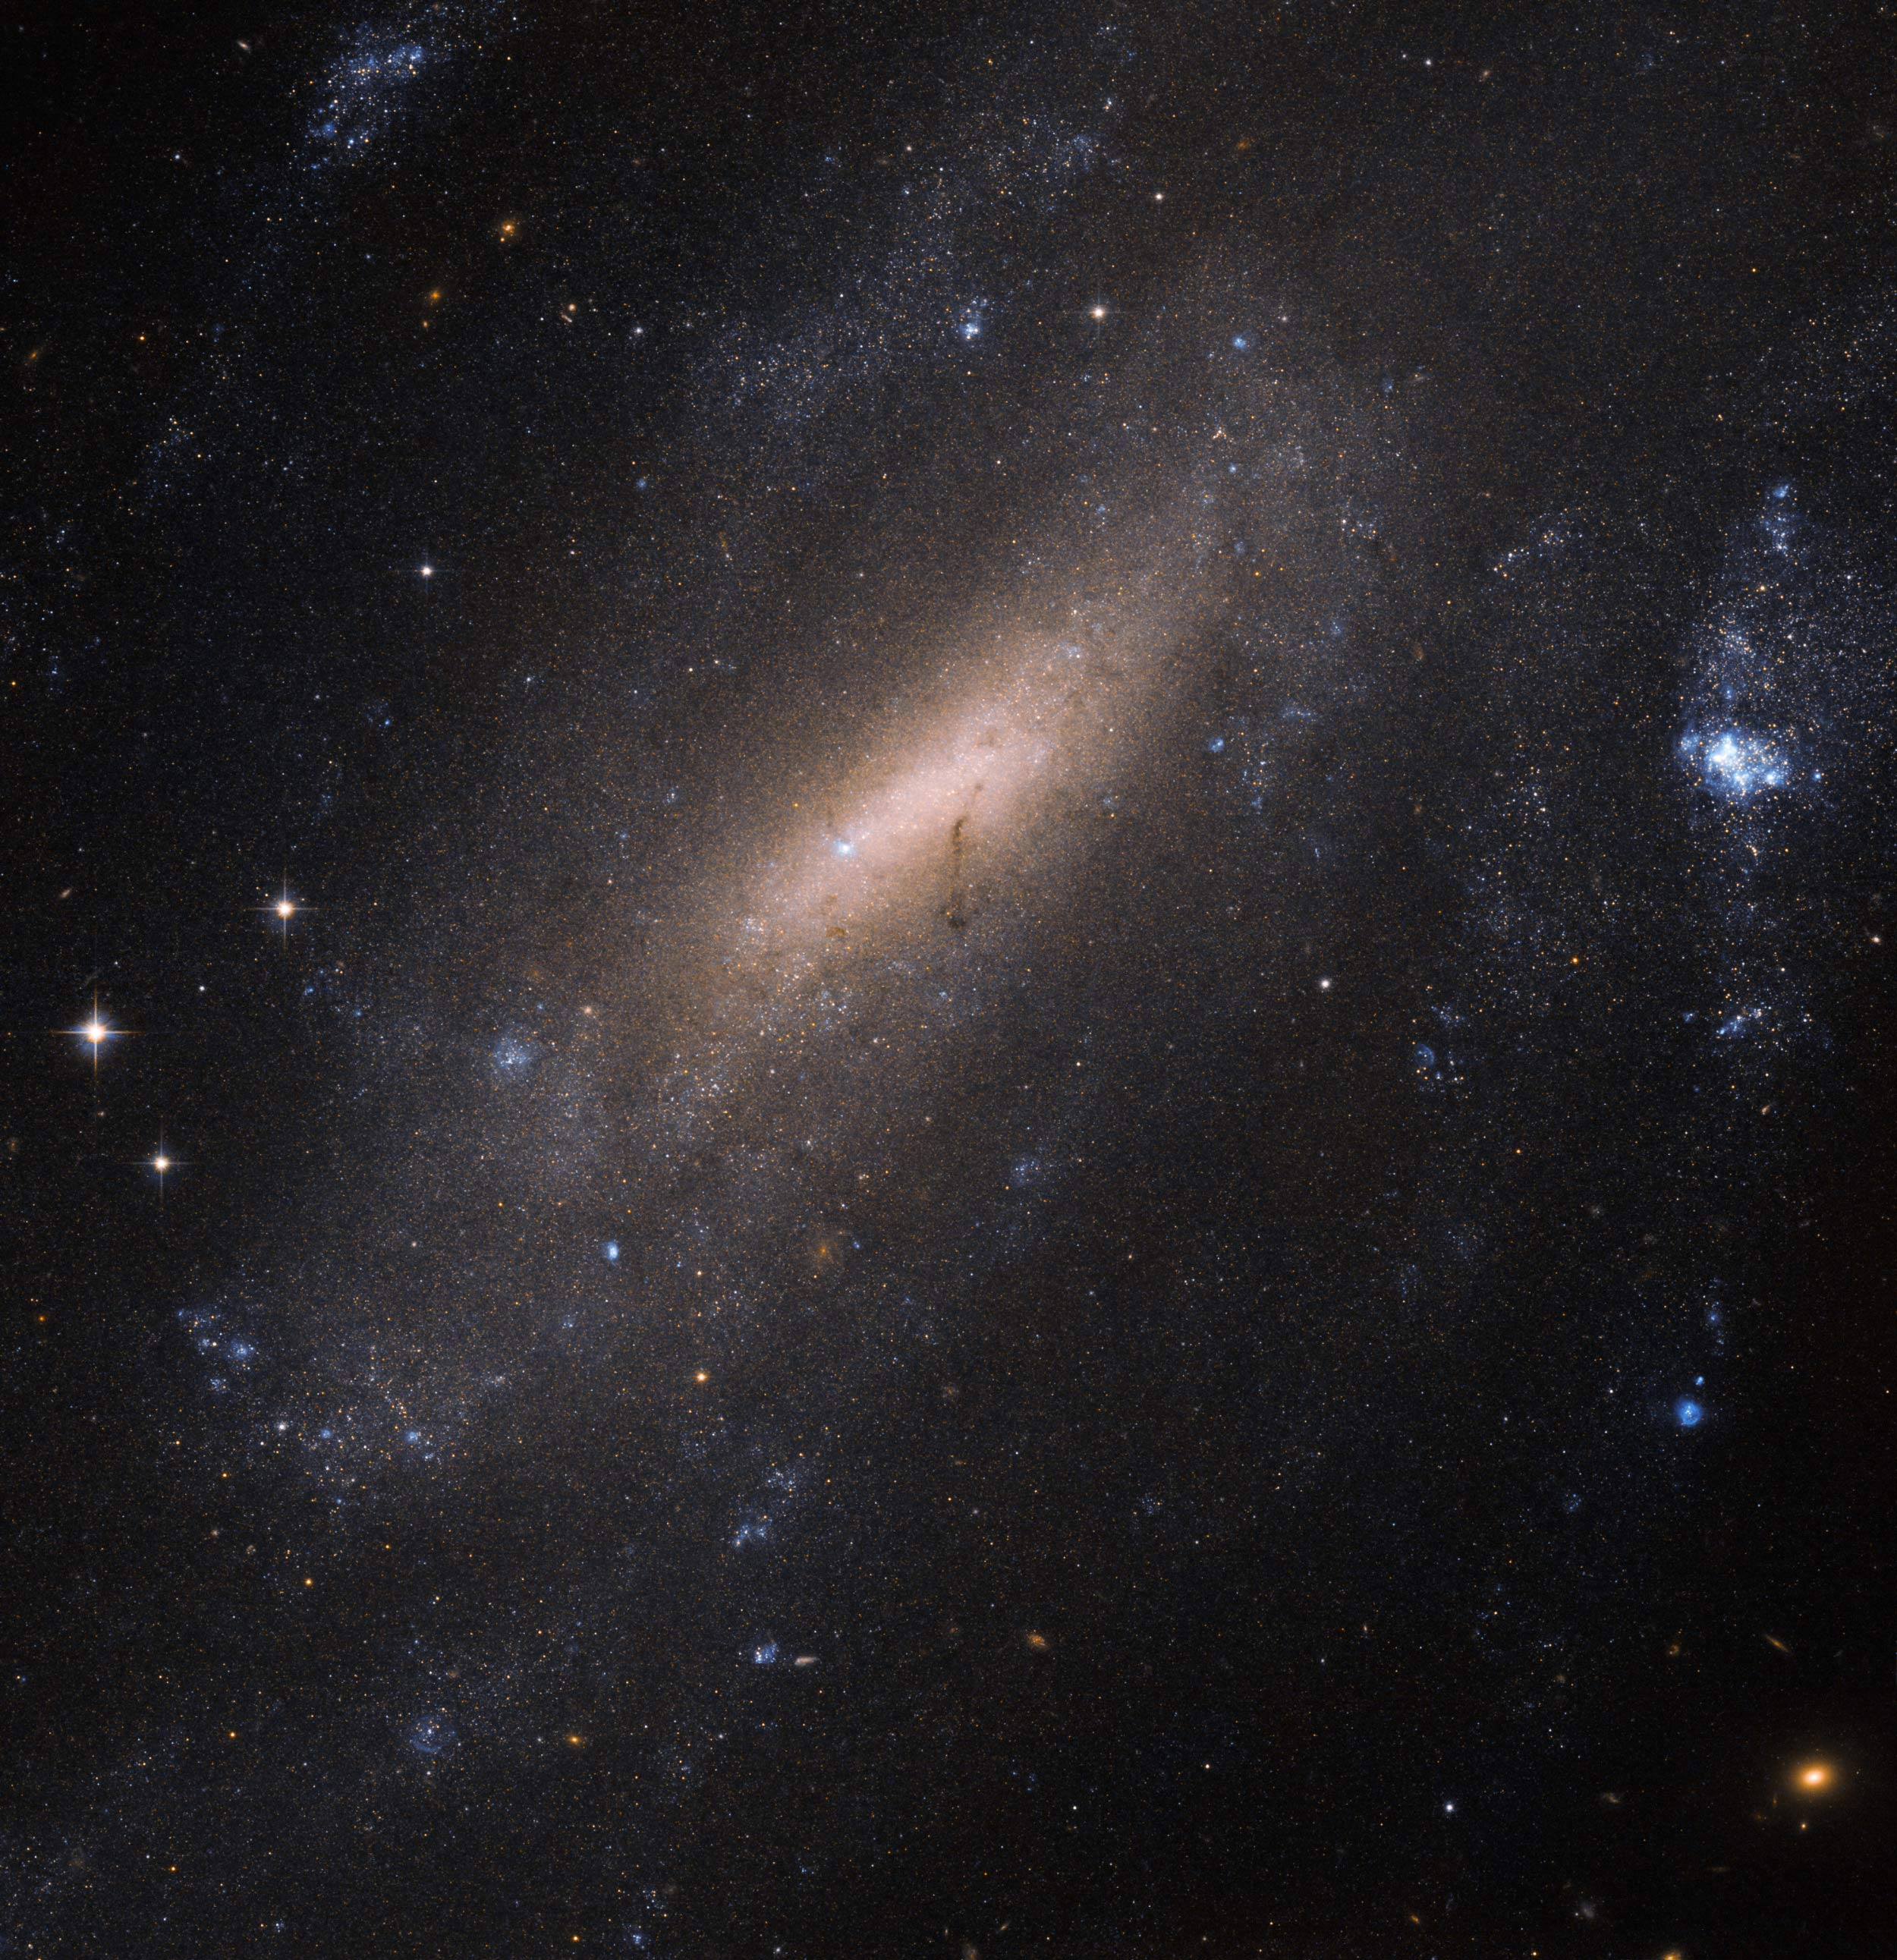 Hubble Observes Barred Spiral Galaxy IC 5201 | Astronomy | Sci-News.com